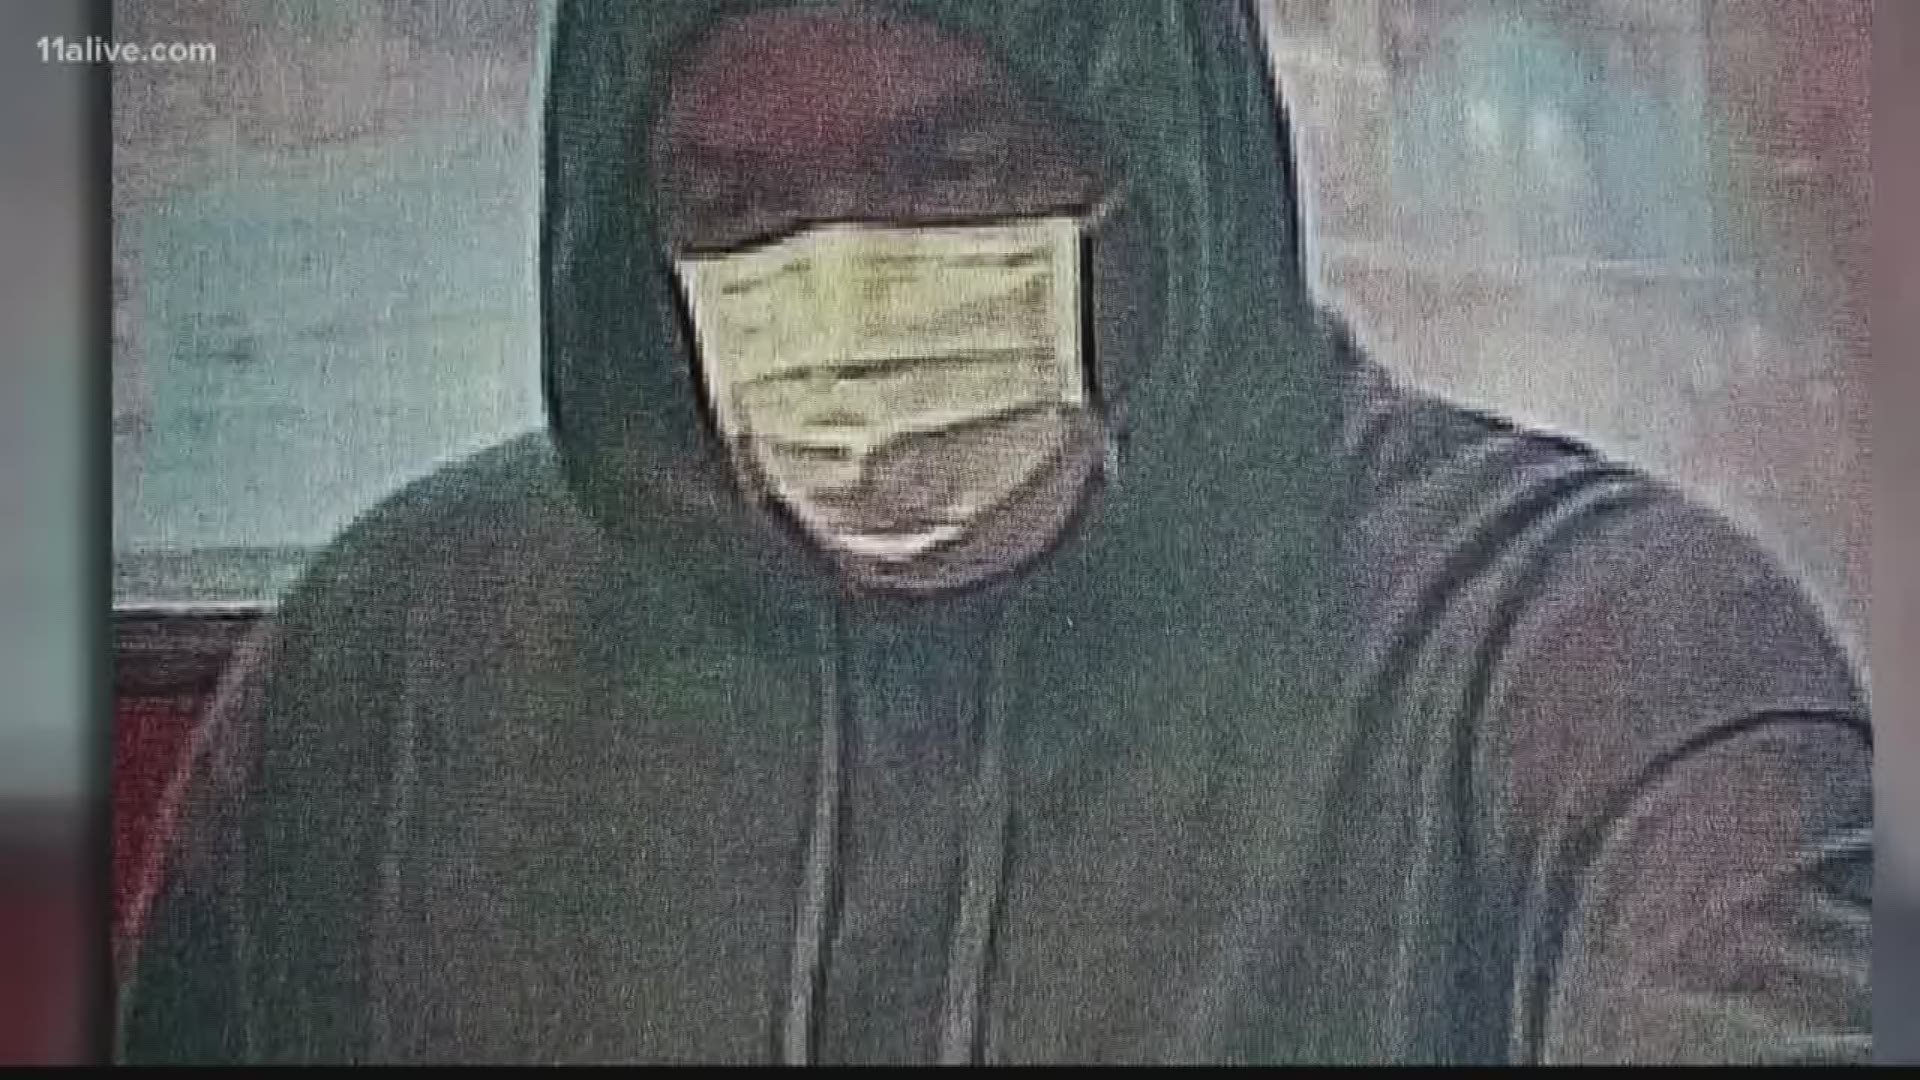 A man has robbed at least six banks while wearing a surgical mask in at least three counties, Smyrna Police said Friday.